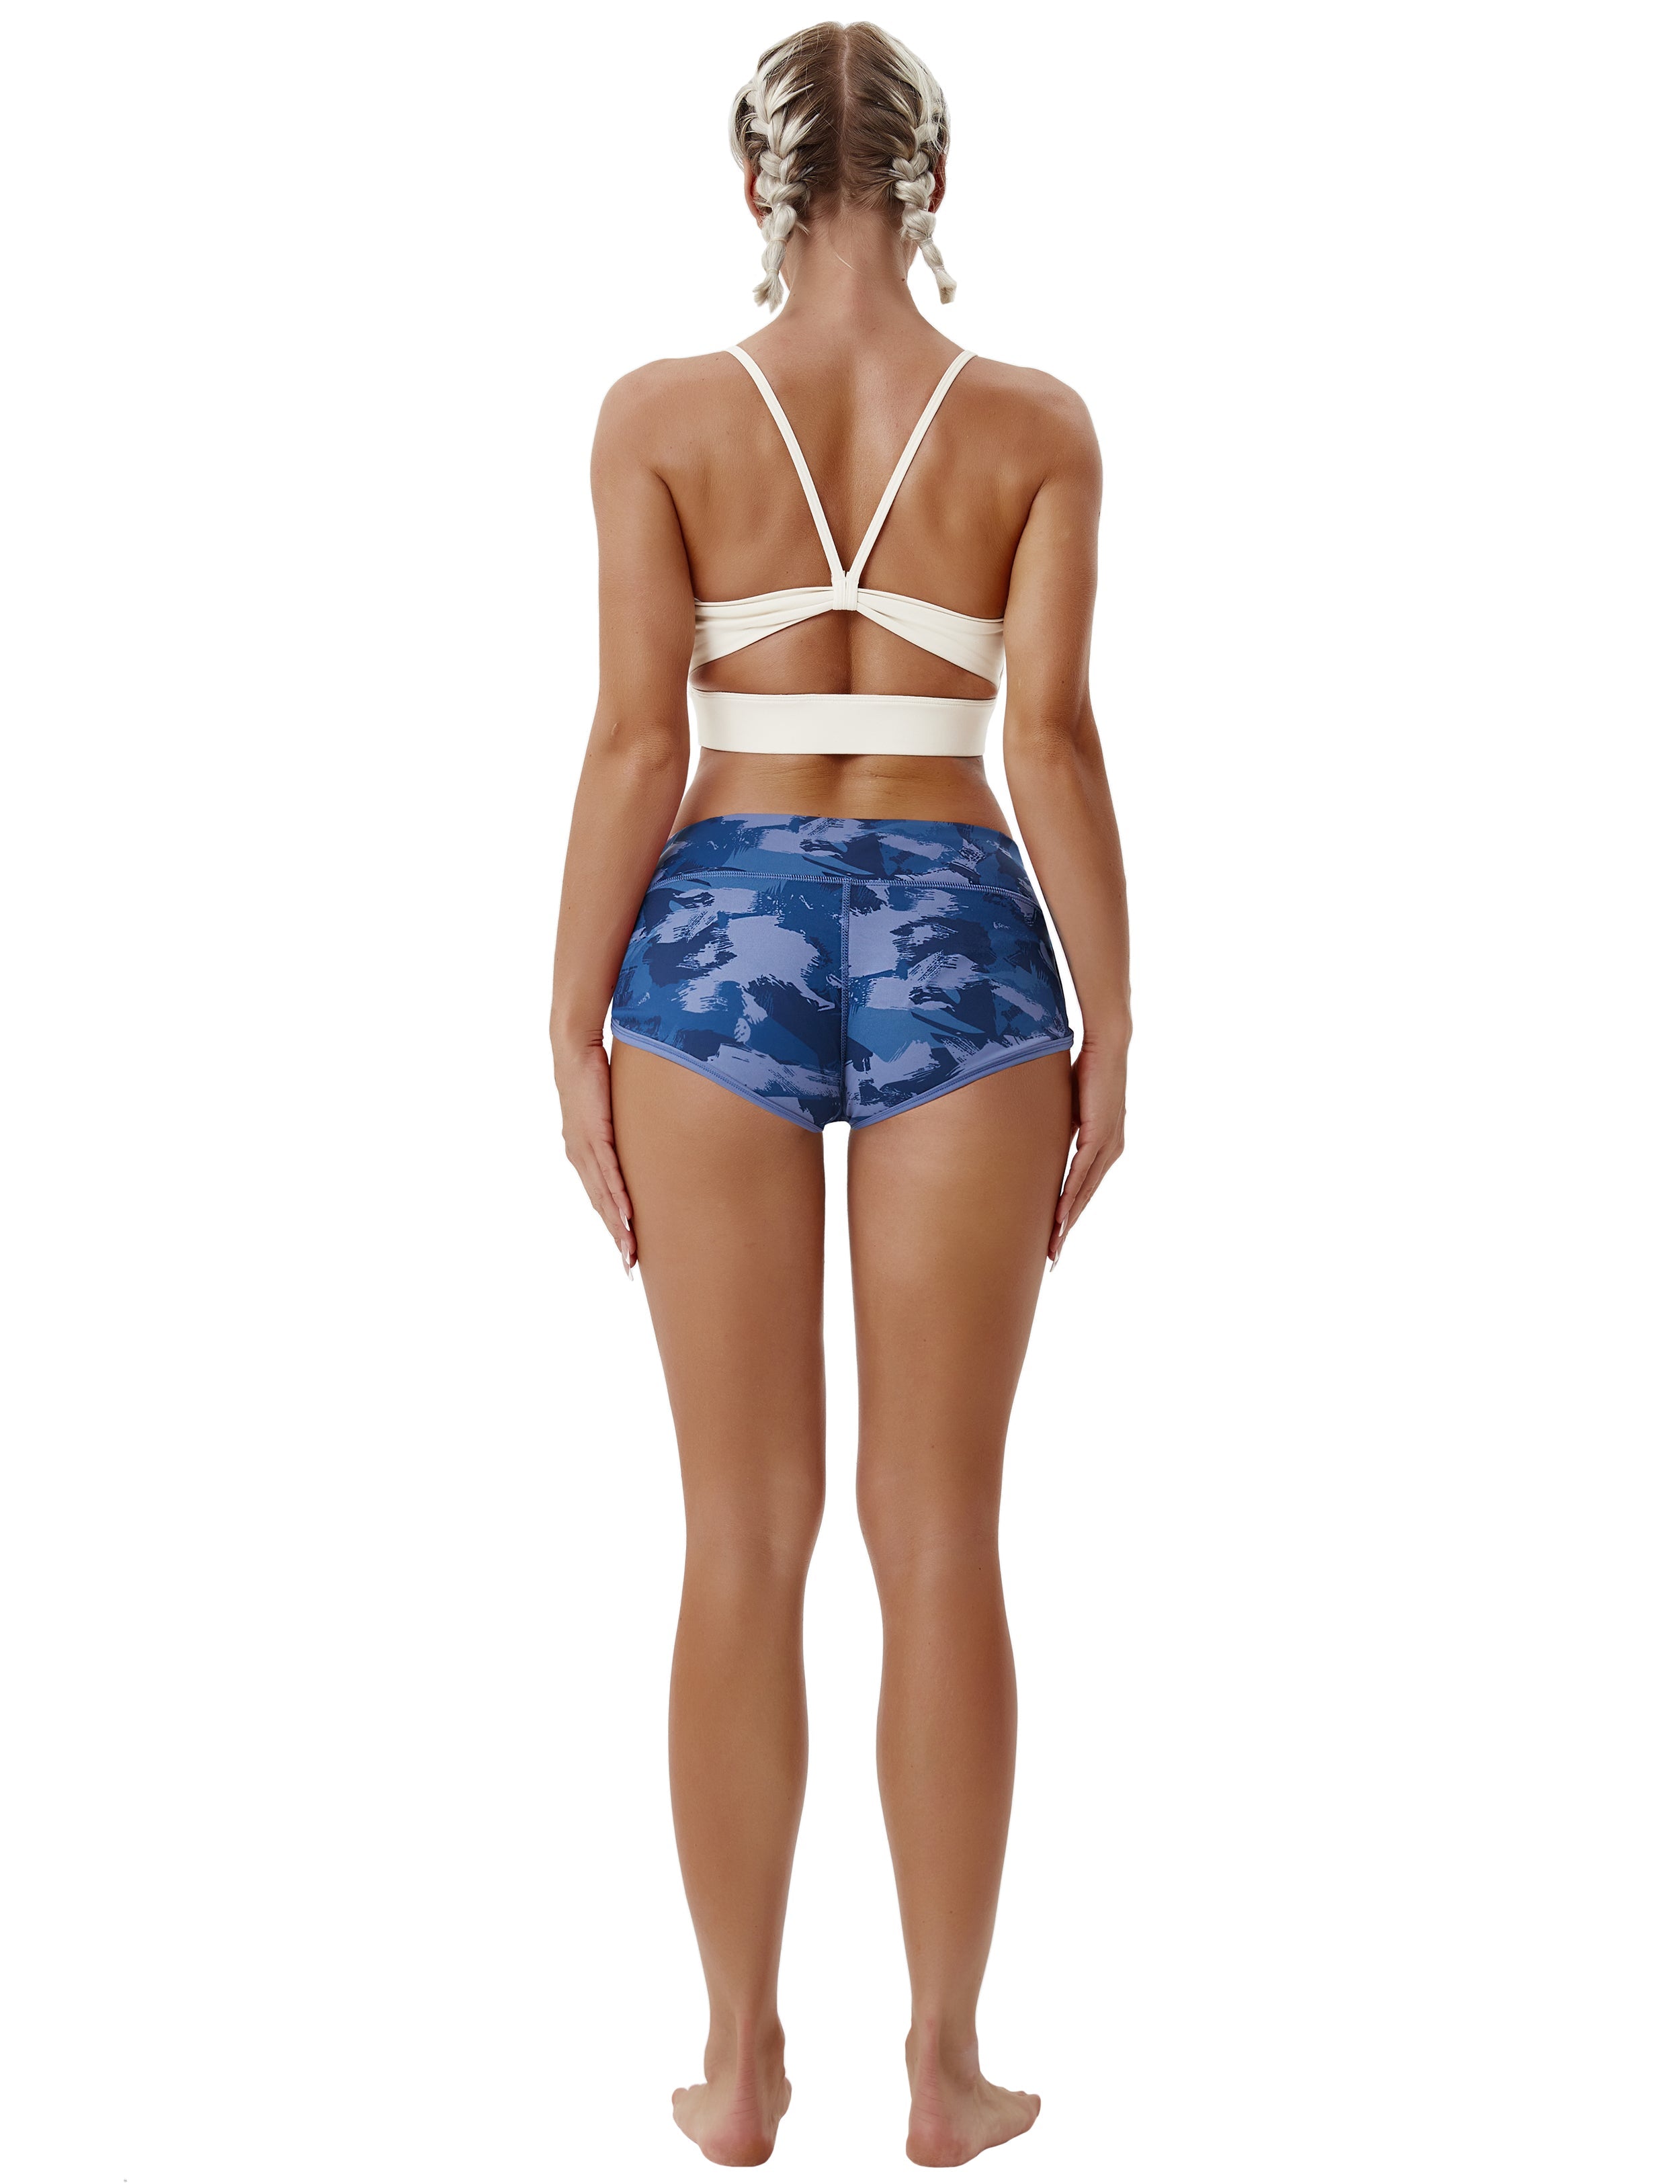 Printed Booty Tall Size Shorts navy brushcamo Sleek, soft, smooth and totally comfortable: our newest sexy style is here. Softest-ever fabric High elasticity High density 4-way stretch Fabric doesn't attract lint easily No see-through Moisture-wicking Machine wash 78% Polyester, 22% Spandex